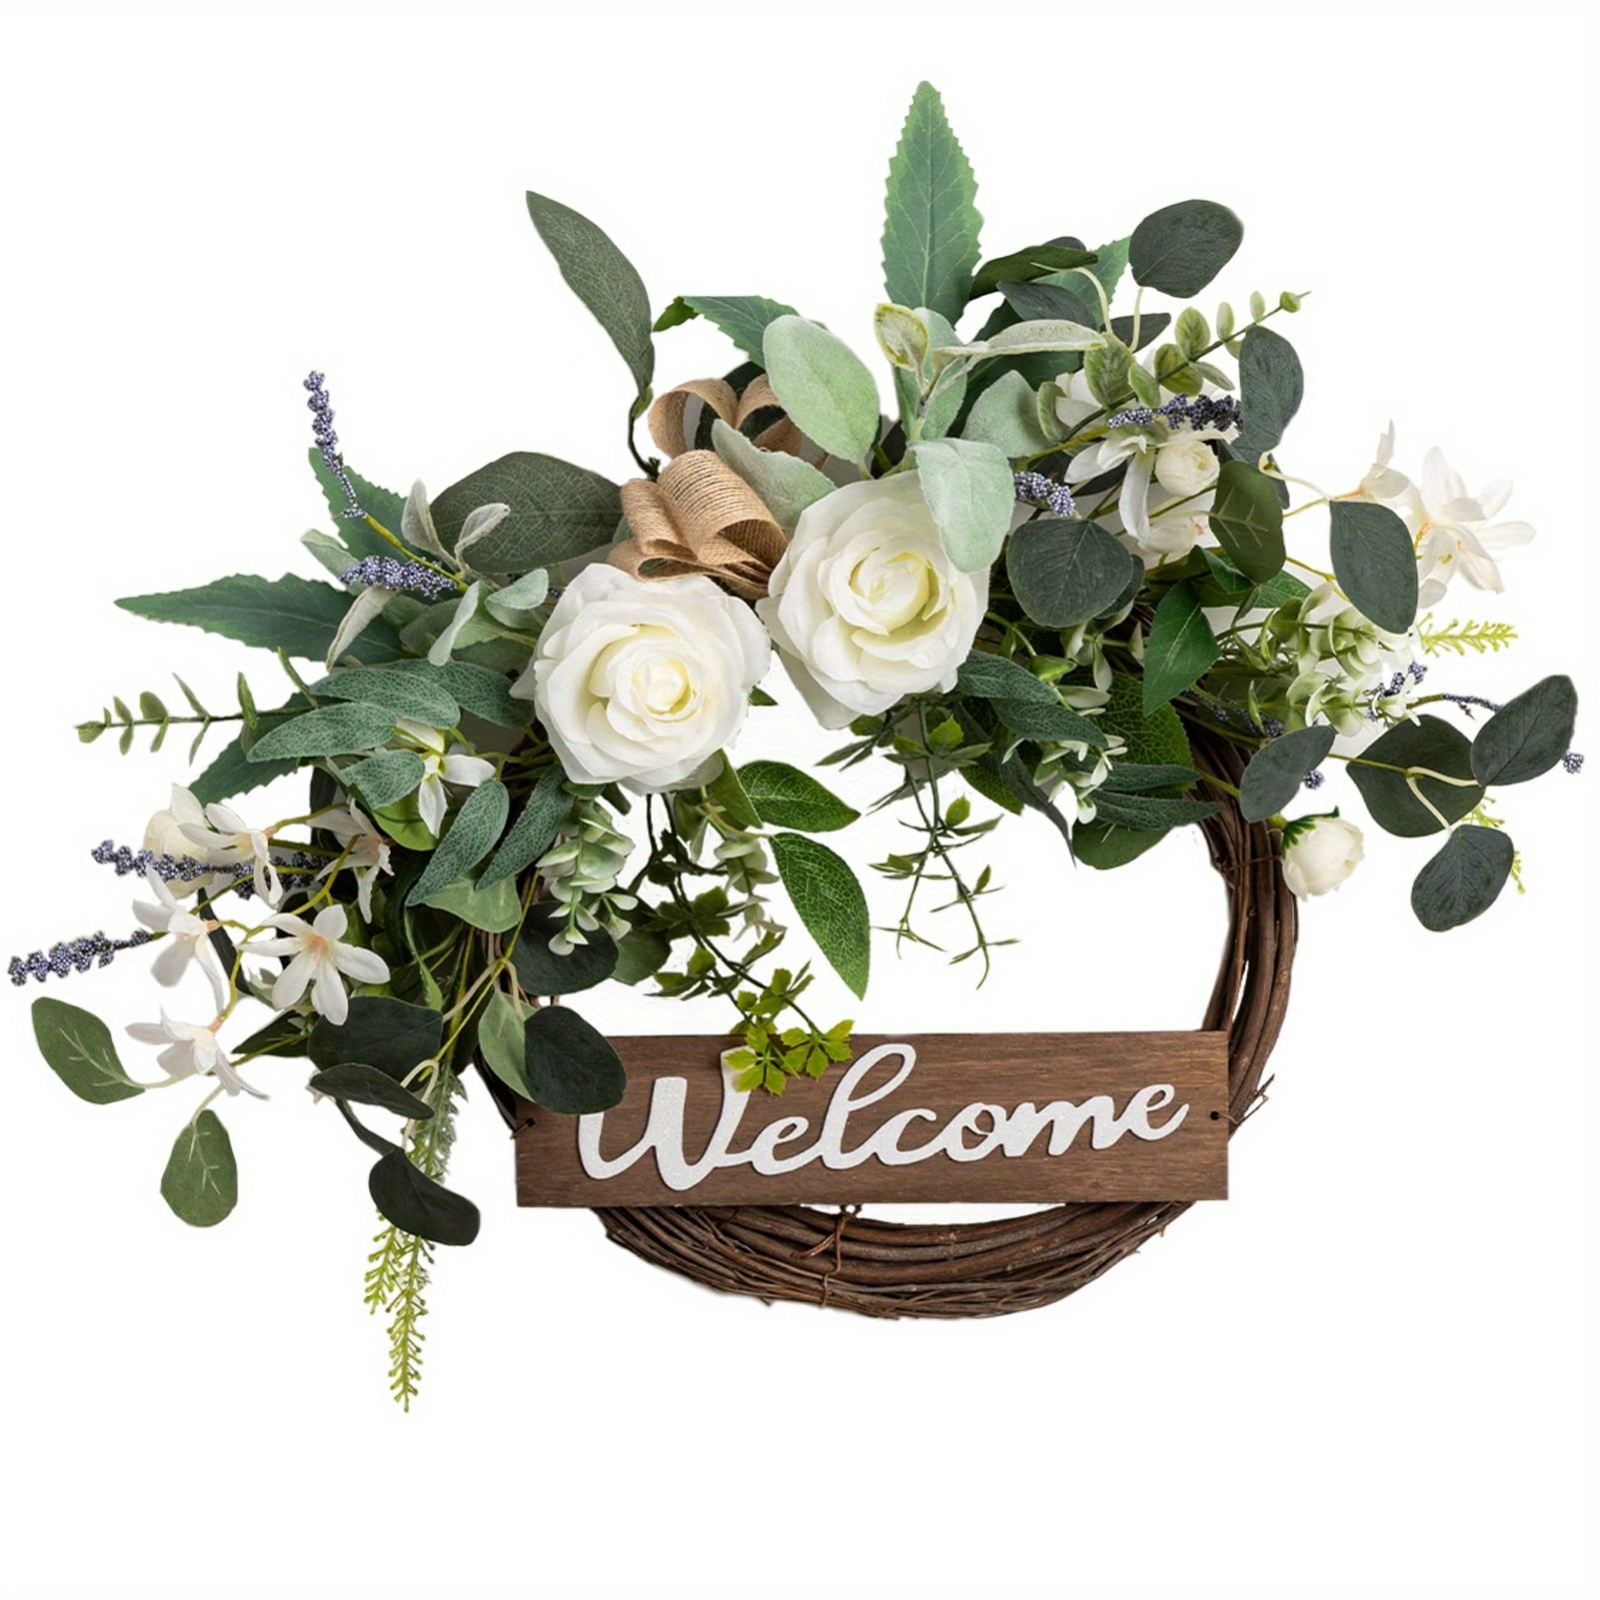 

Front Door Wreath With Welcome Artificial Eucalyptus Christmas Wreath 60.96 Cm Halloween Wreath For Front Door Autumn Wreath For Christmas Party Decorations, Welcome Wreath For All Seasons